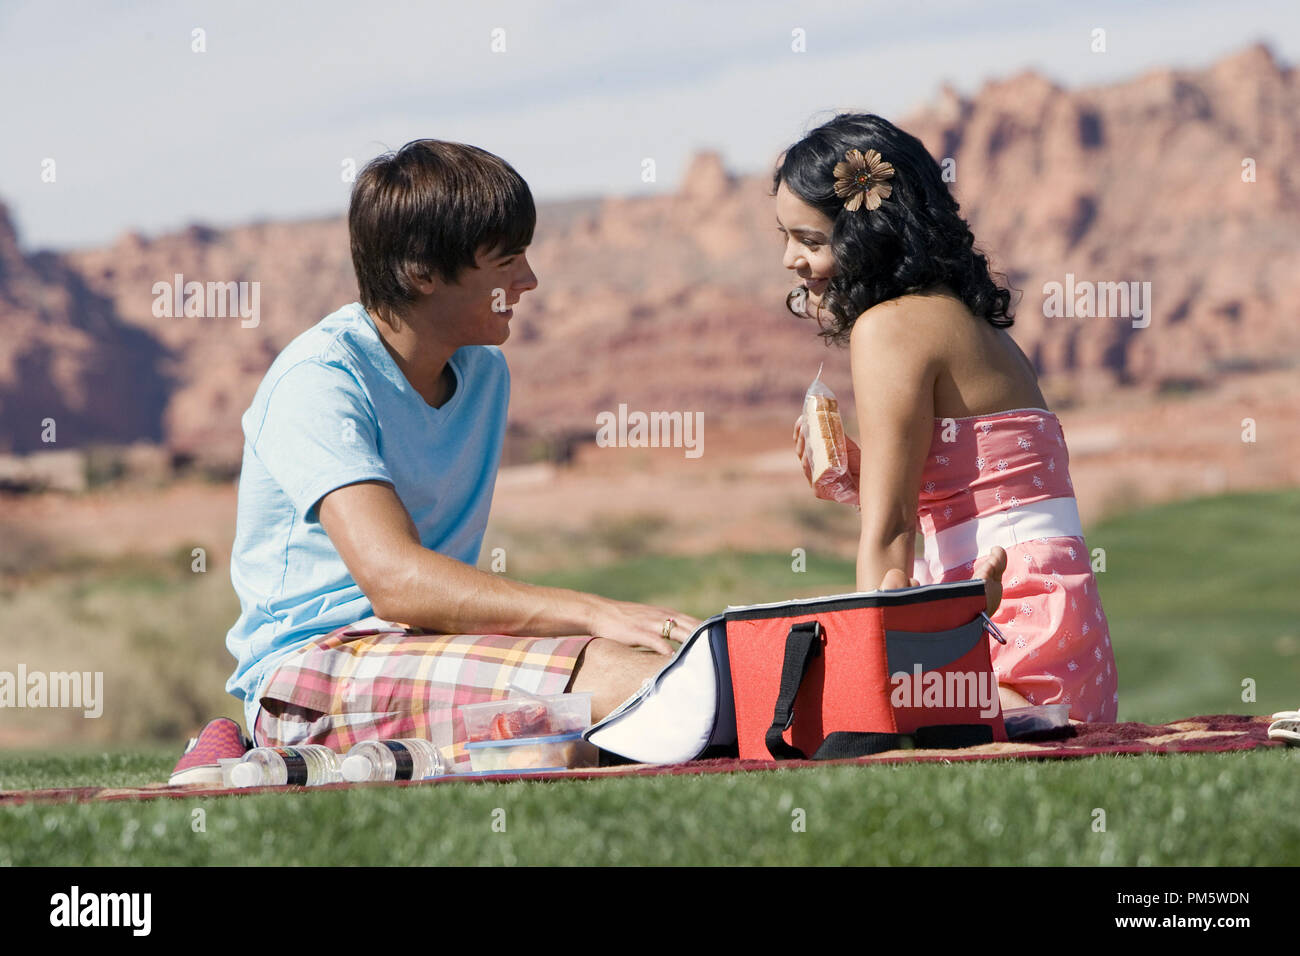 Studio Publicity Still from 'High School Musical 2' Zac Efron, Vanessa Anne Hudgens 2007 Photo credit: Adam Larkey   File Reference # 307381028THA  For Editorial Use Only -  All Rights Reserved Stock Photo